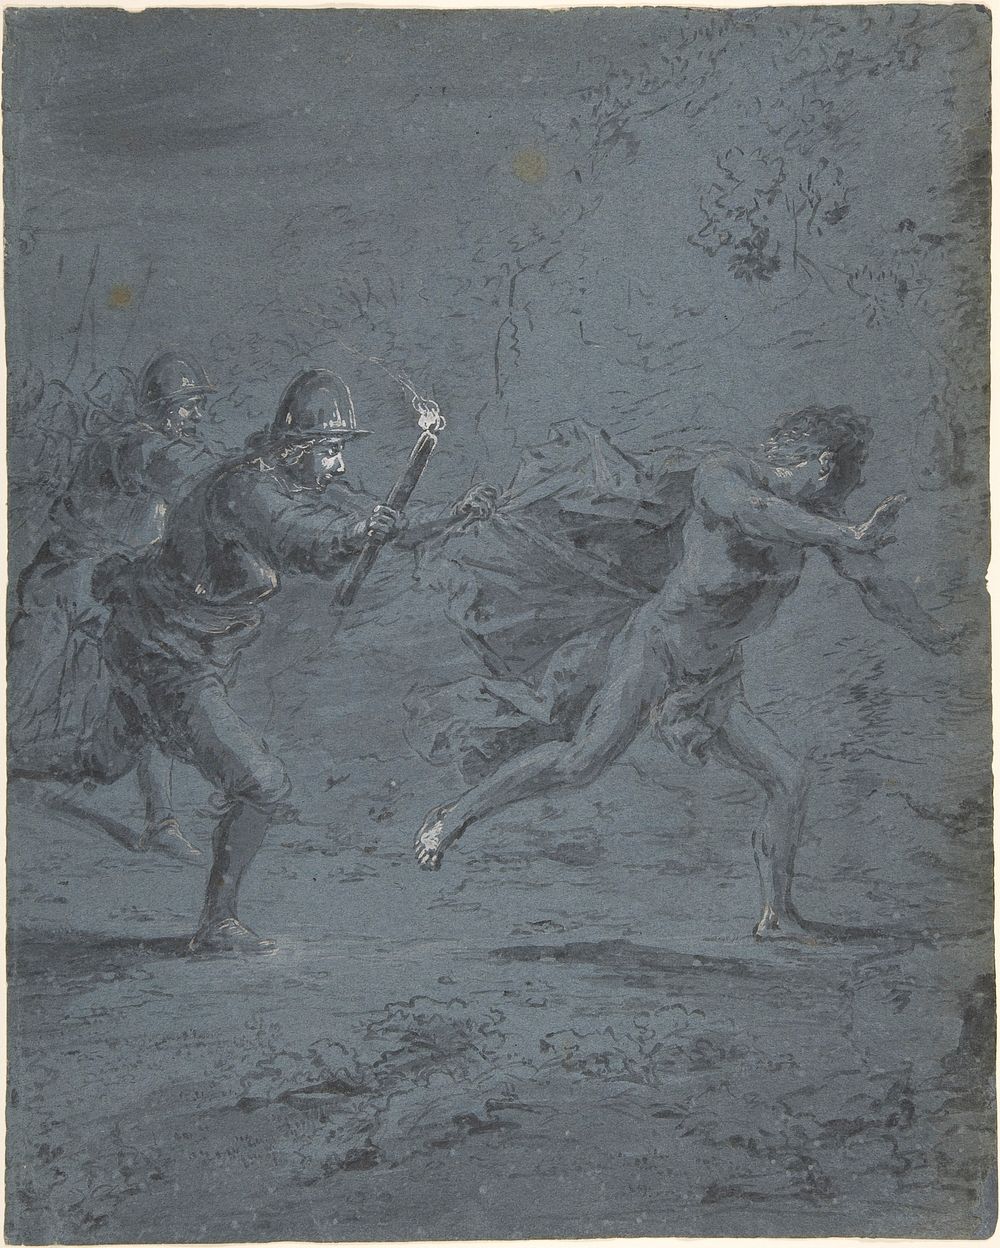 Night scene with soldiers chasing a fugitive (Mark XIV, 5-52) by Leonaert Bramer